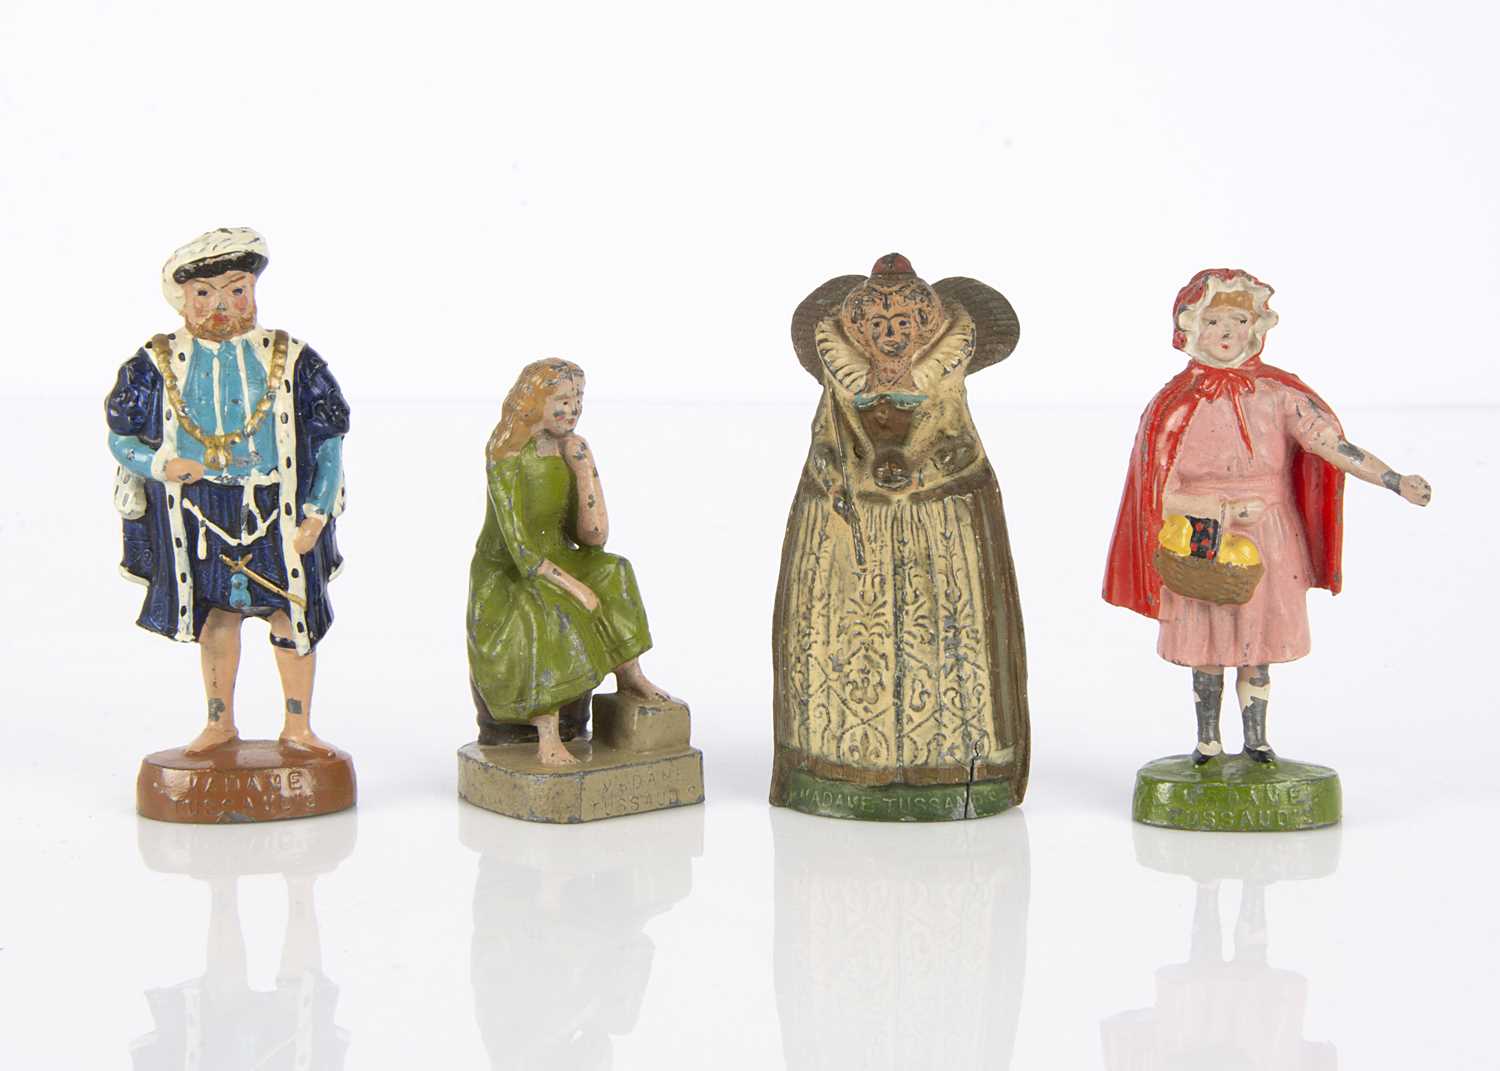 Lot 117 - Britains for Madame Tussauds personality souvenirs 1930s